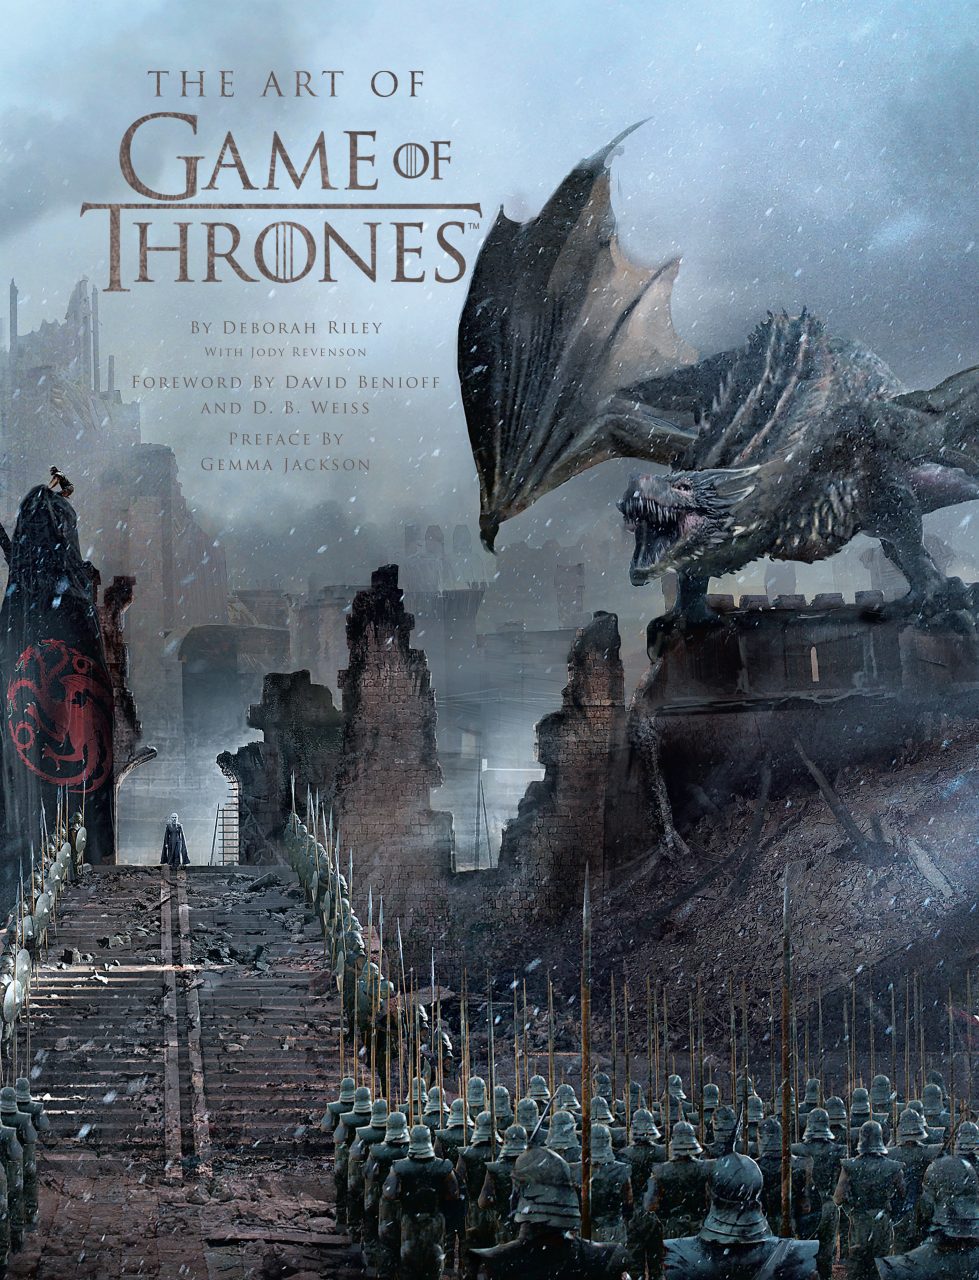 The Art Of Game Of Thrones cover (HBO/Insight Editions)